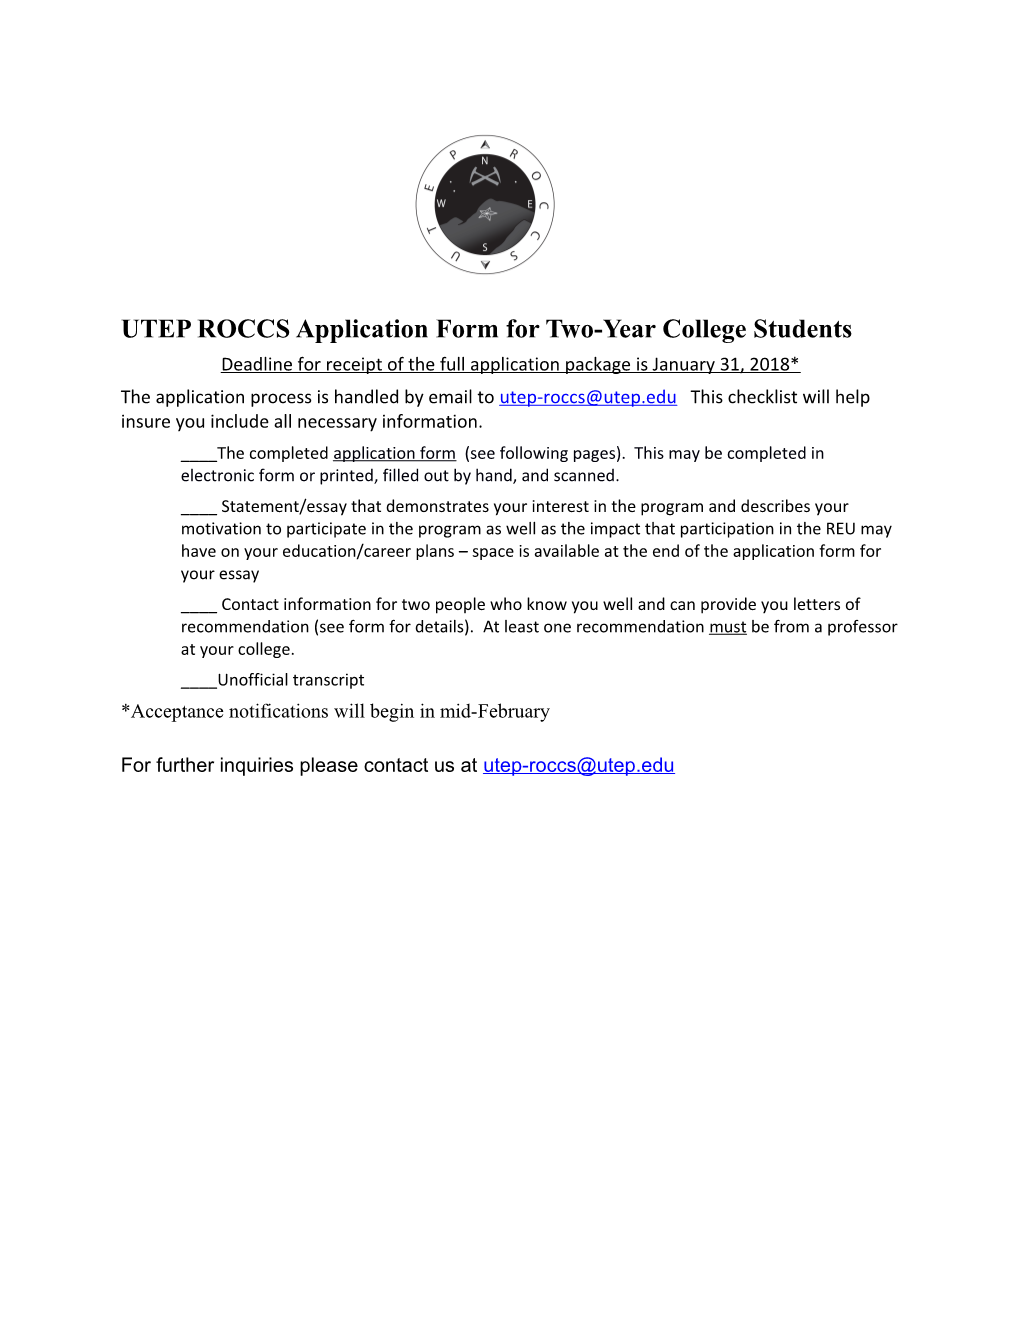 UTEP ROCCS Application Form Fortwo-Year College Students